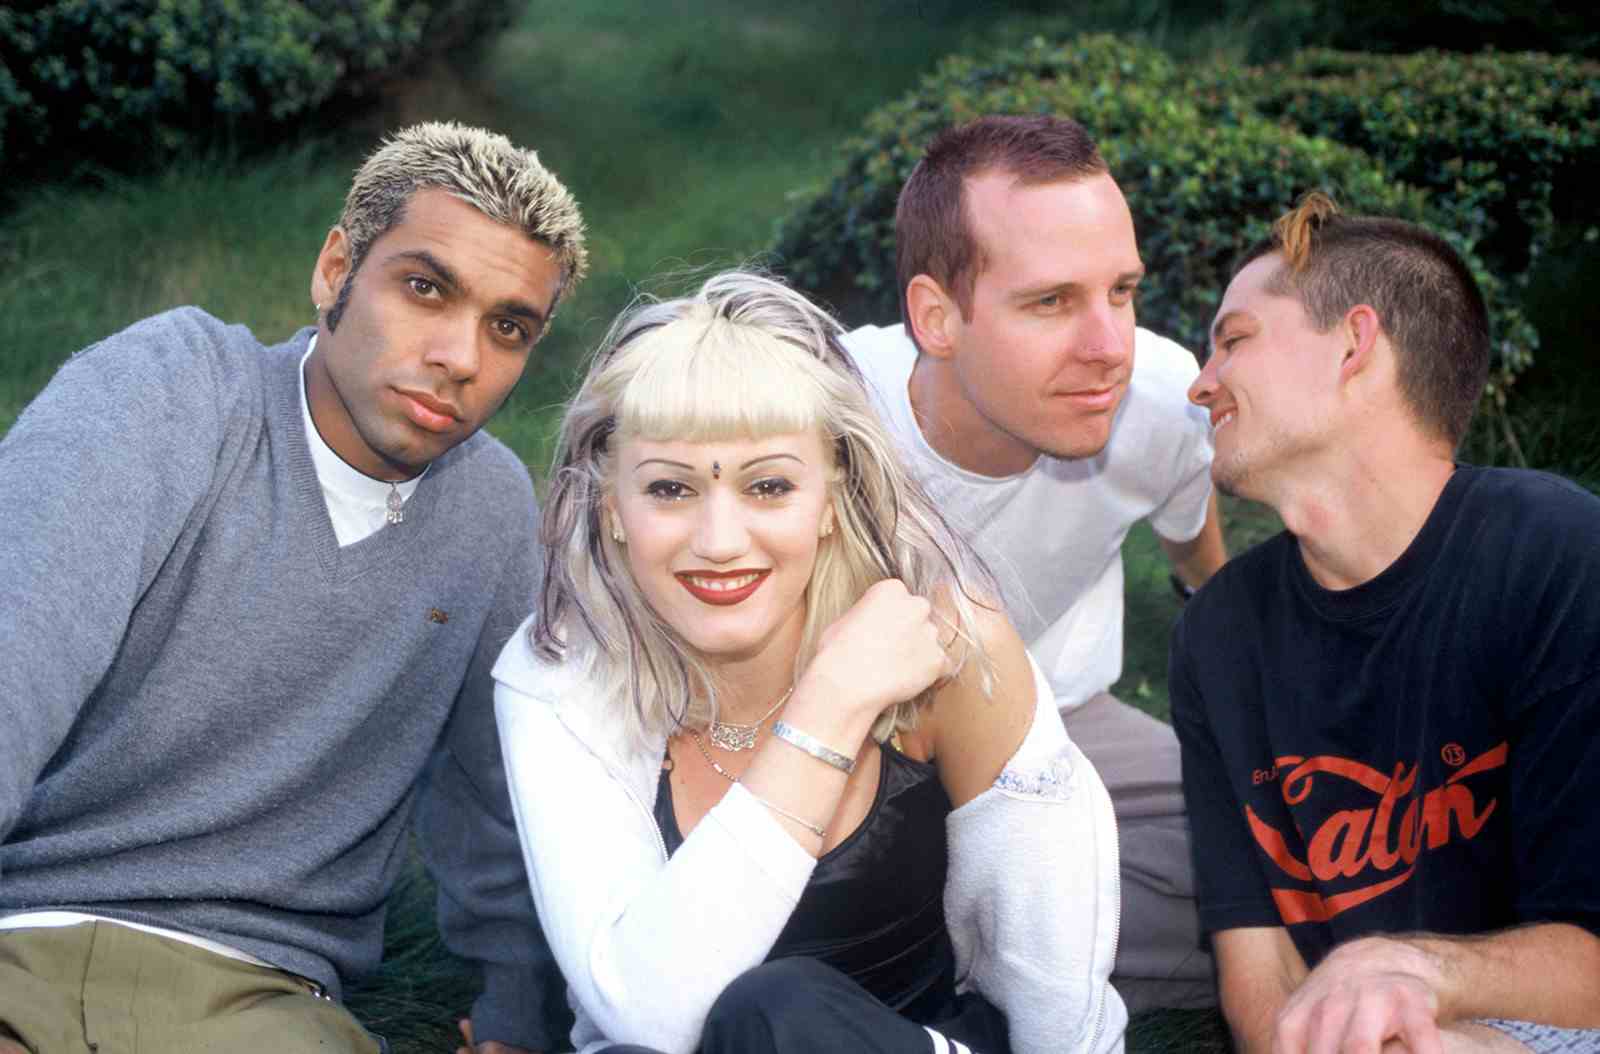 No Doubt band members bassist Tony Kanal, singer Gwen Stefani, Tom Dumont, and Adrian Young backstage Live 105's BFD 1996 at Shoreline Amphitheatre on June 14, 1996 in Mountain View, California (Tim Mosenfelder/Getty Images)